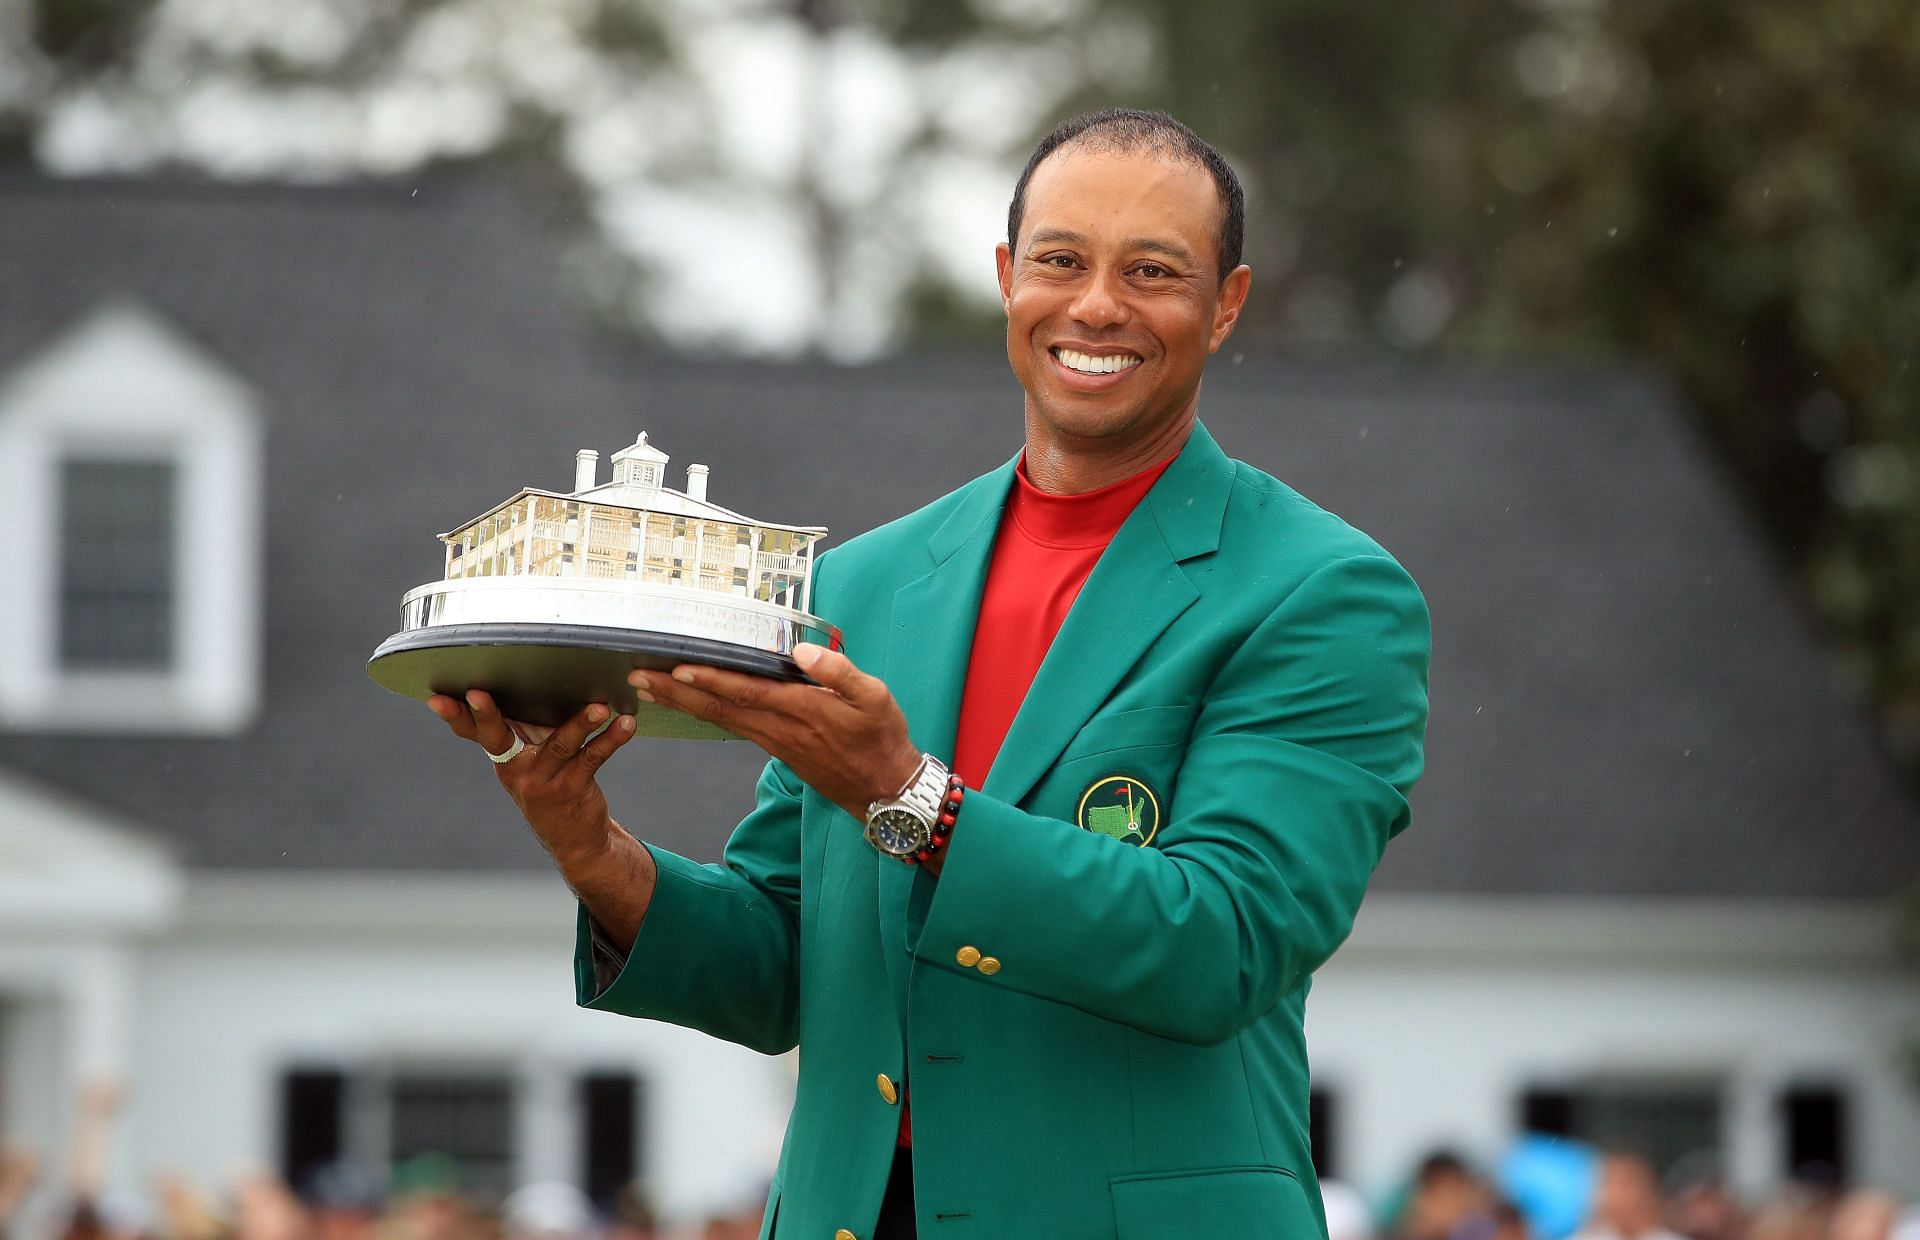 Tiger Woods at the Masters 2019